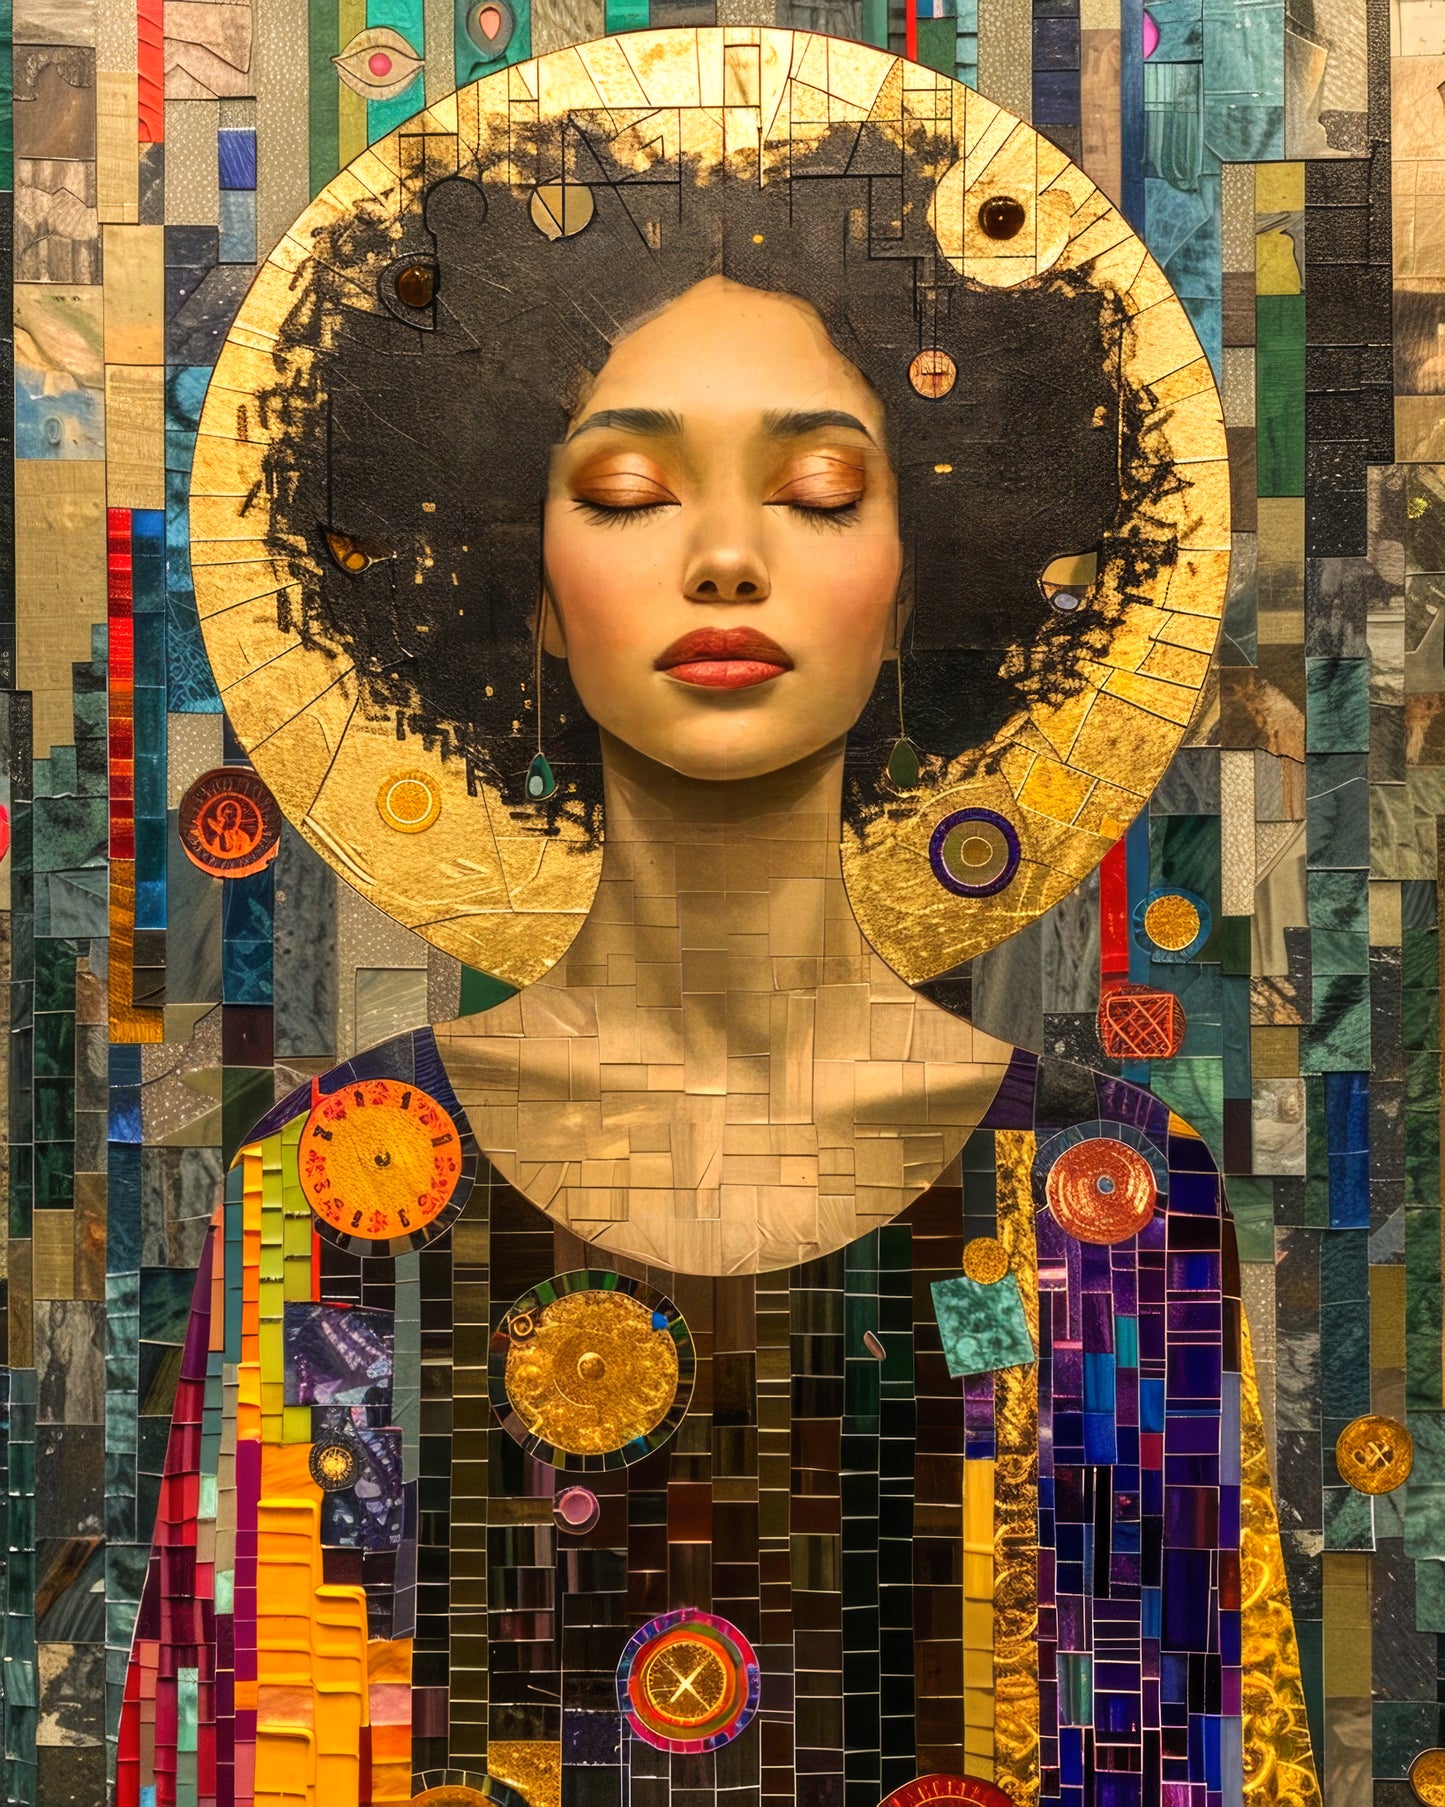 Fine art print of a woman with a golden halo and mosaic background from the Heart Of Gold collection.